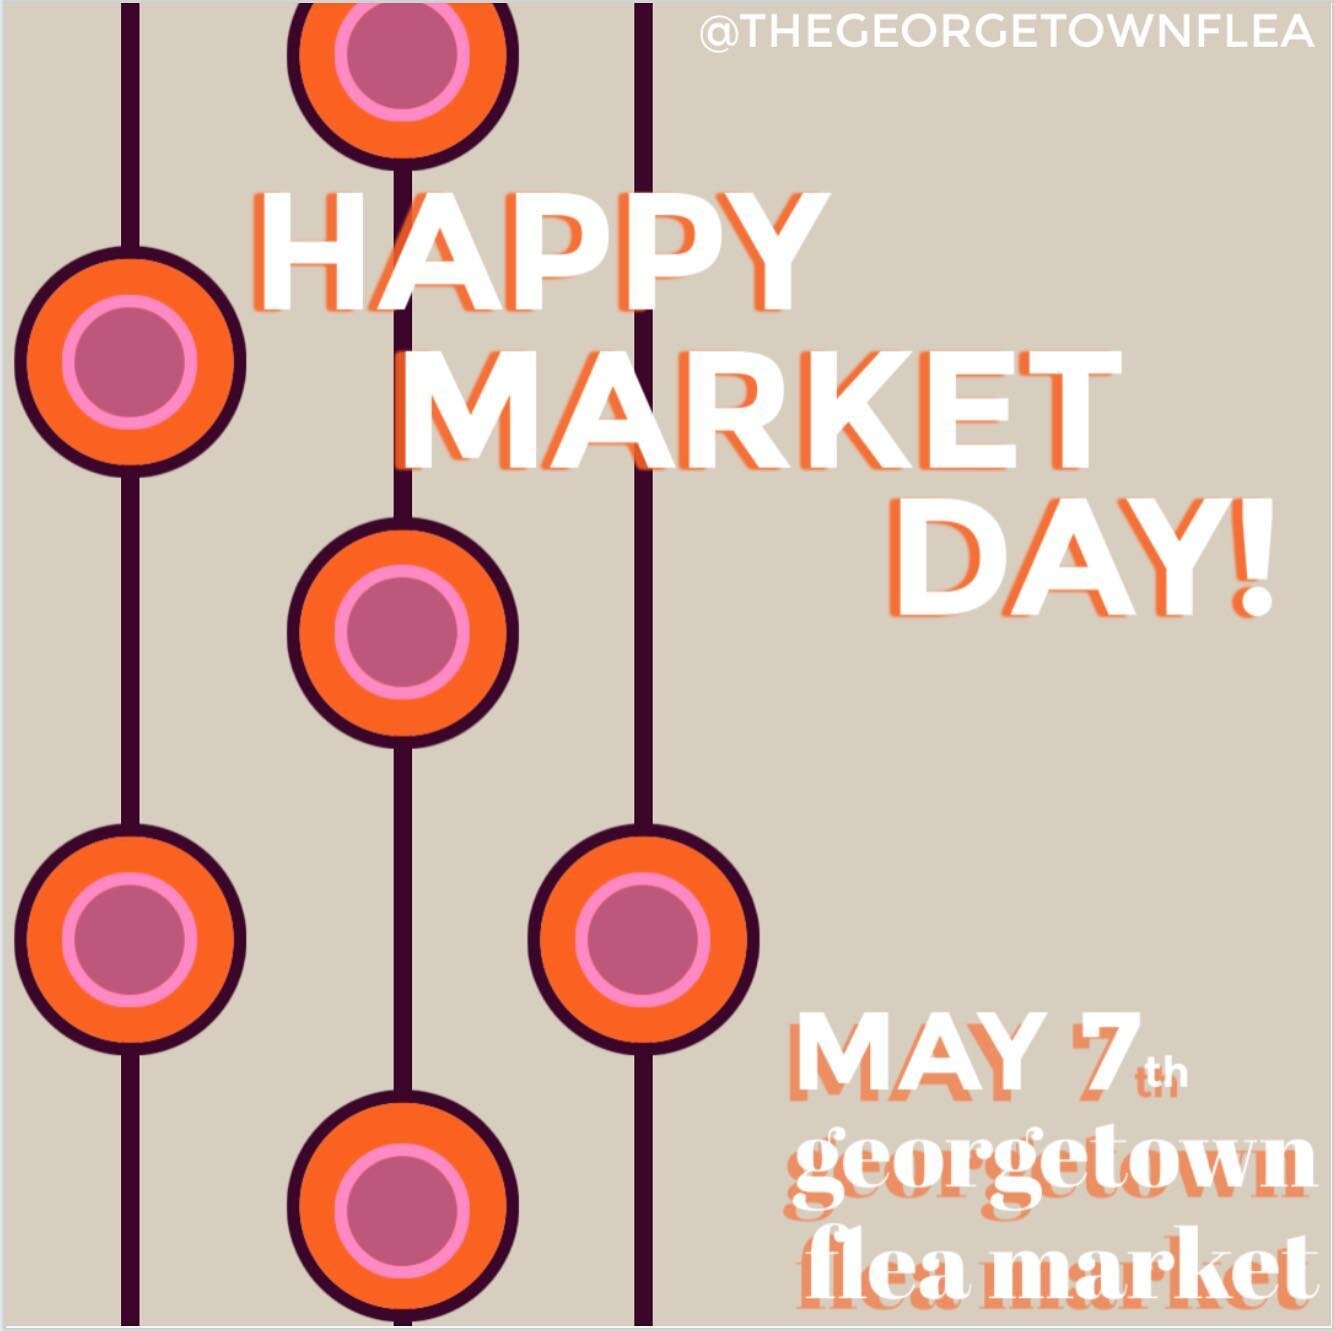 I spy, with my little eye &mdash; blue skies!
Today is the day, come play!

Saturday, May 7th from 10-4 Seattle&rsquo;s Newest Flea Market.

Over 80 vendors. Vintage, handmade, local.

Two lots &mdash; @thegtstables @georgetowntrailerparkofficial 

9